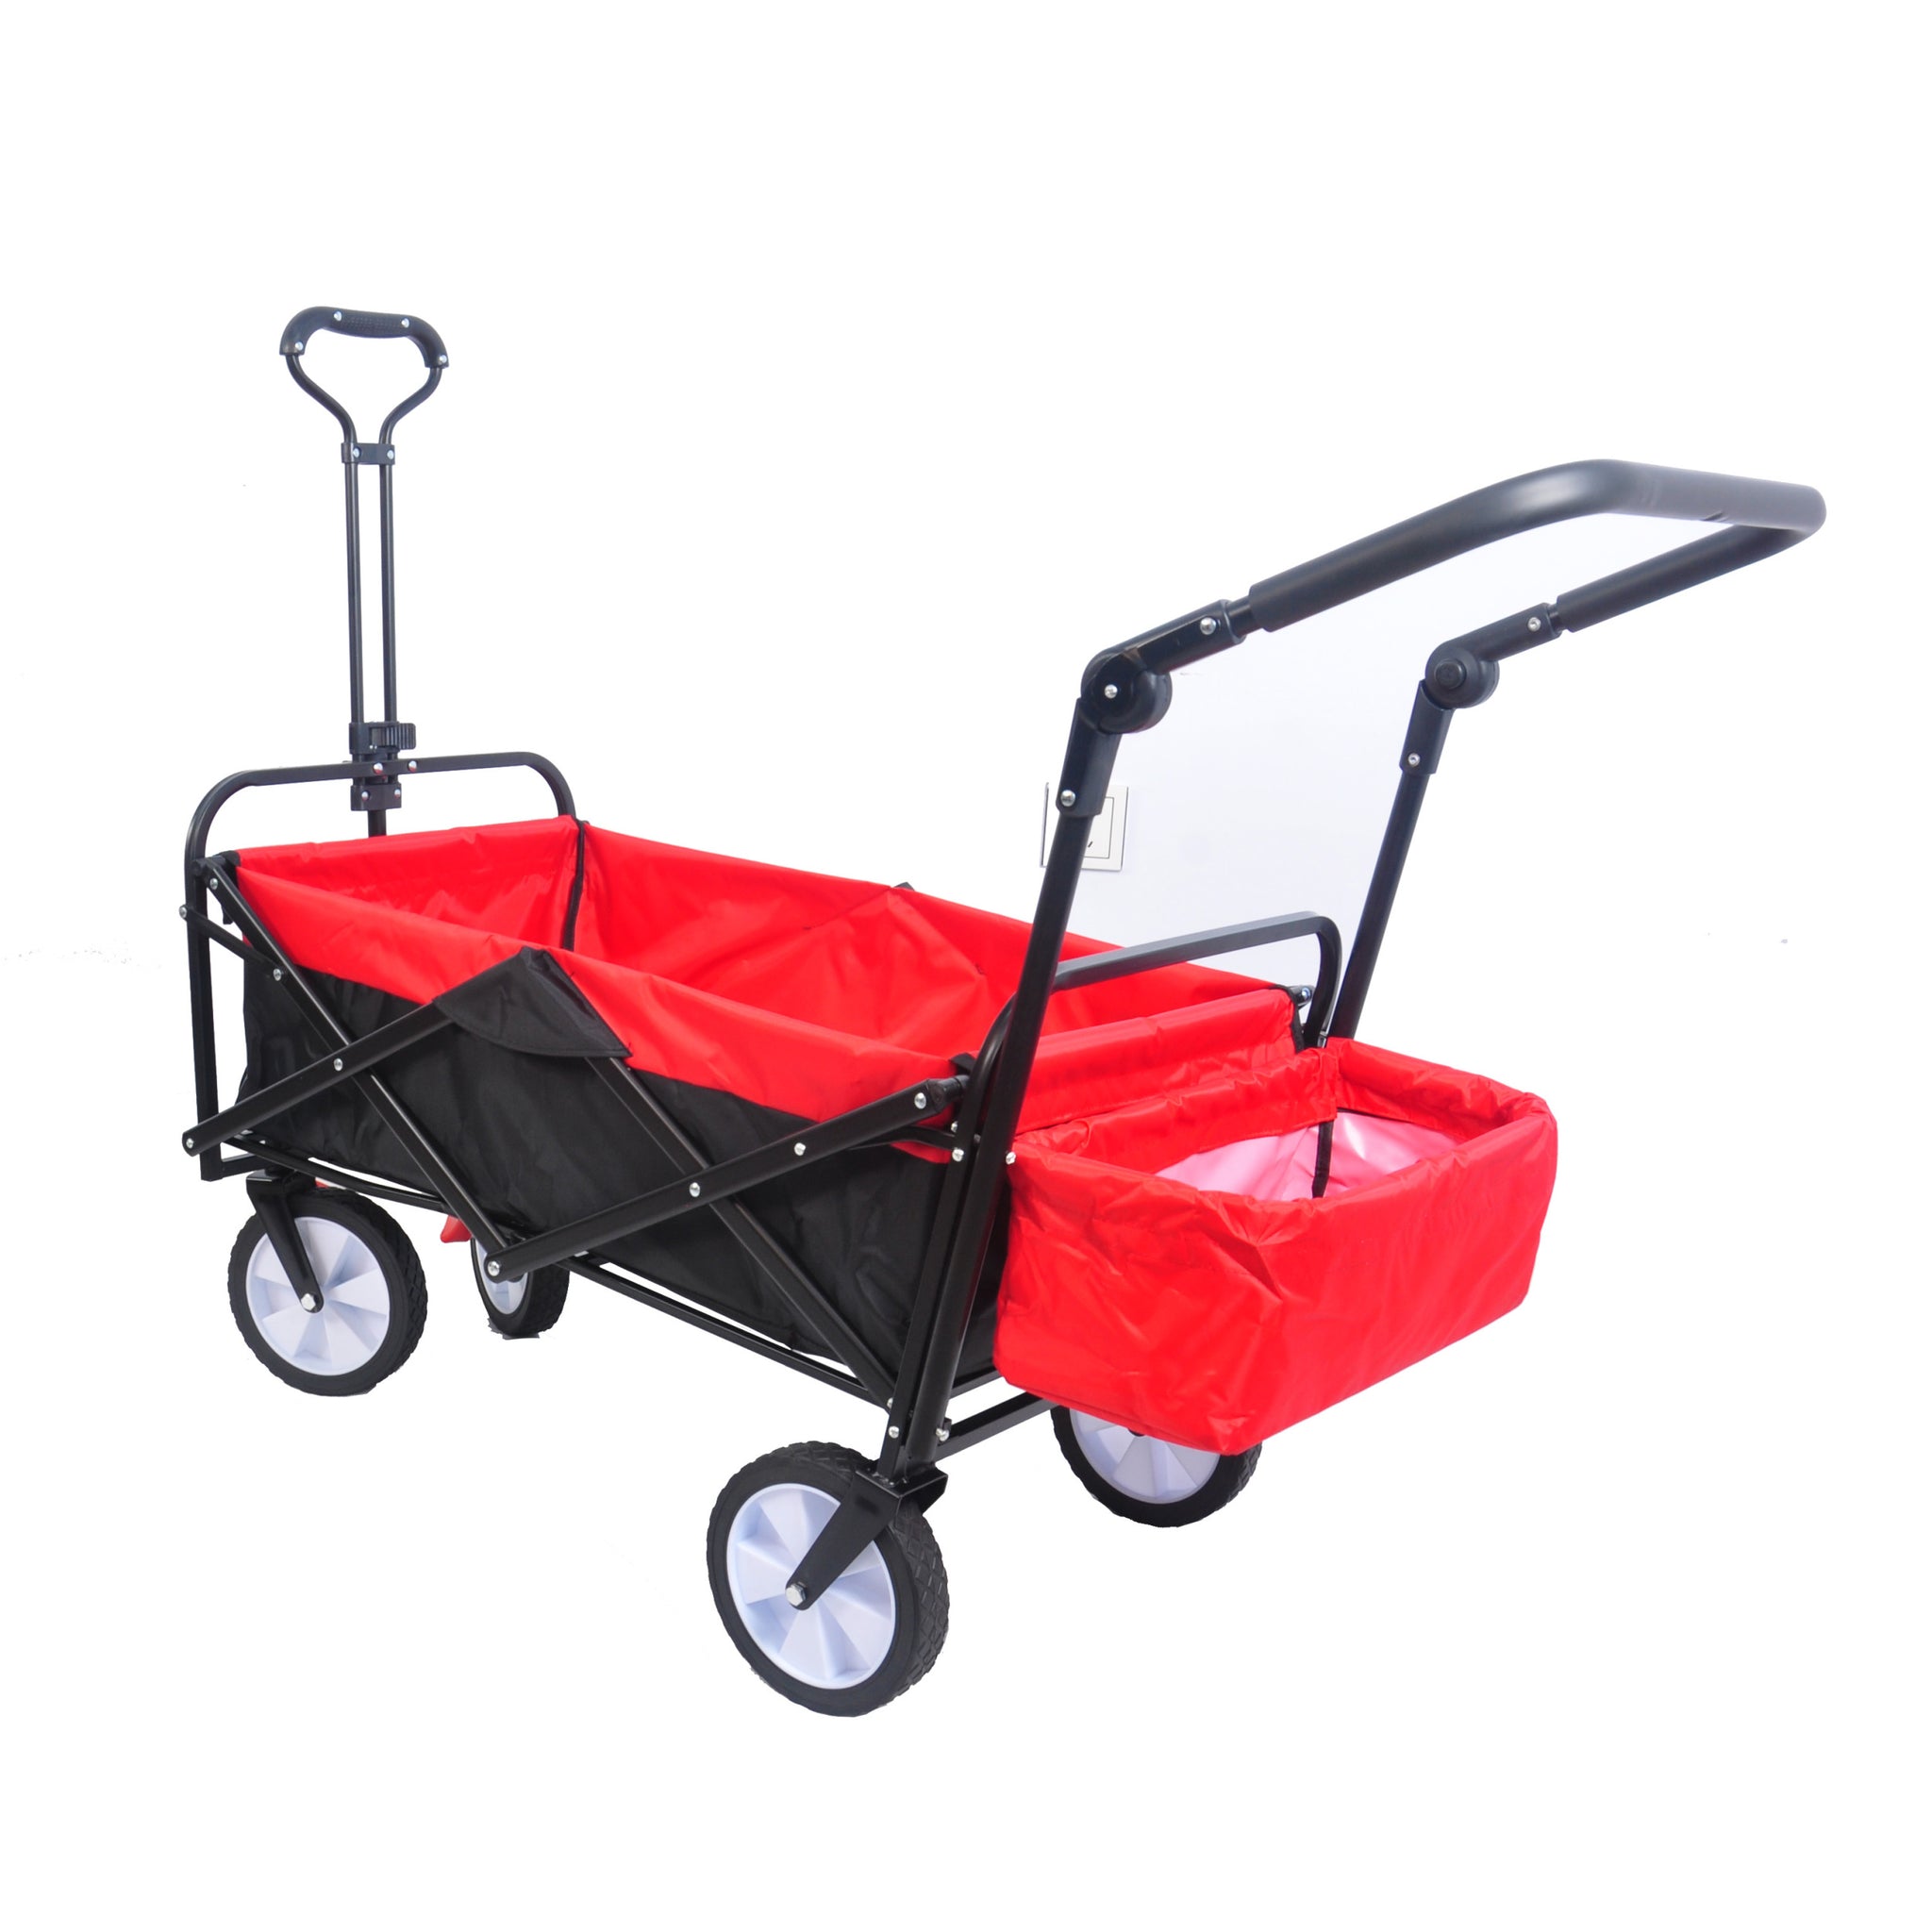 folding wagon Collapsible Outdoor Utility Wagon, Heavy black+red-abs+rubber+steel (q235)